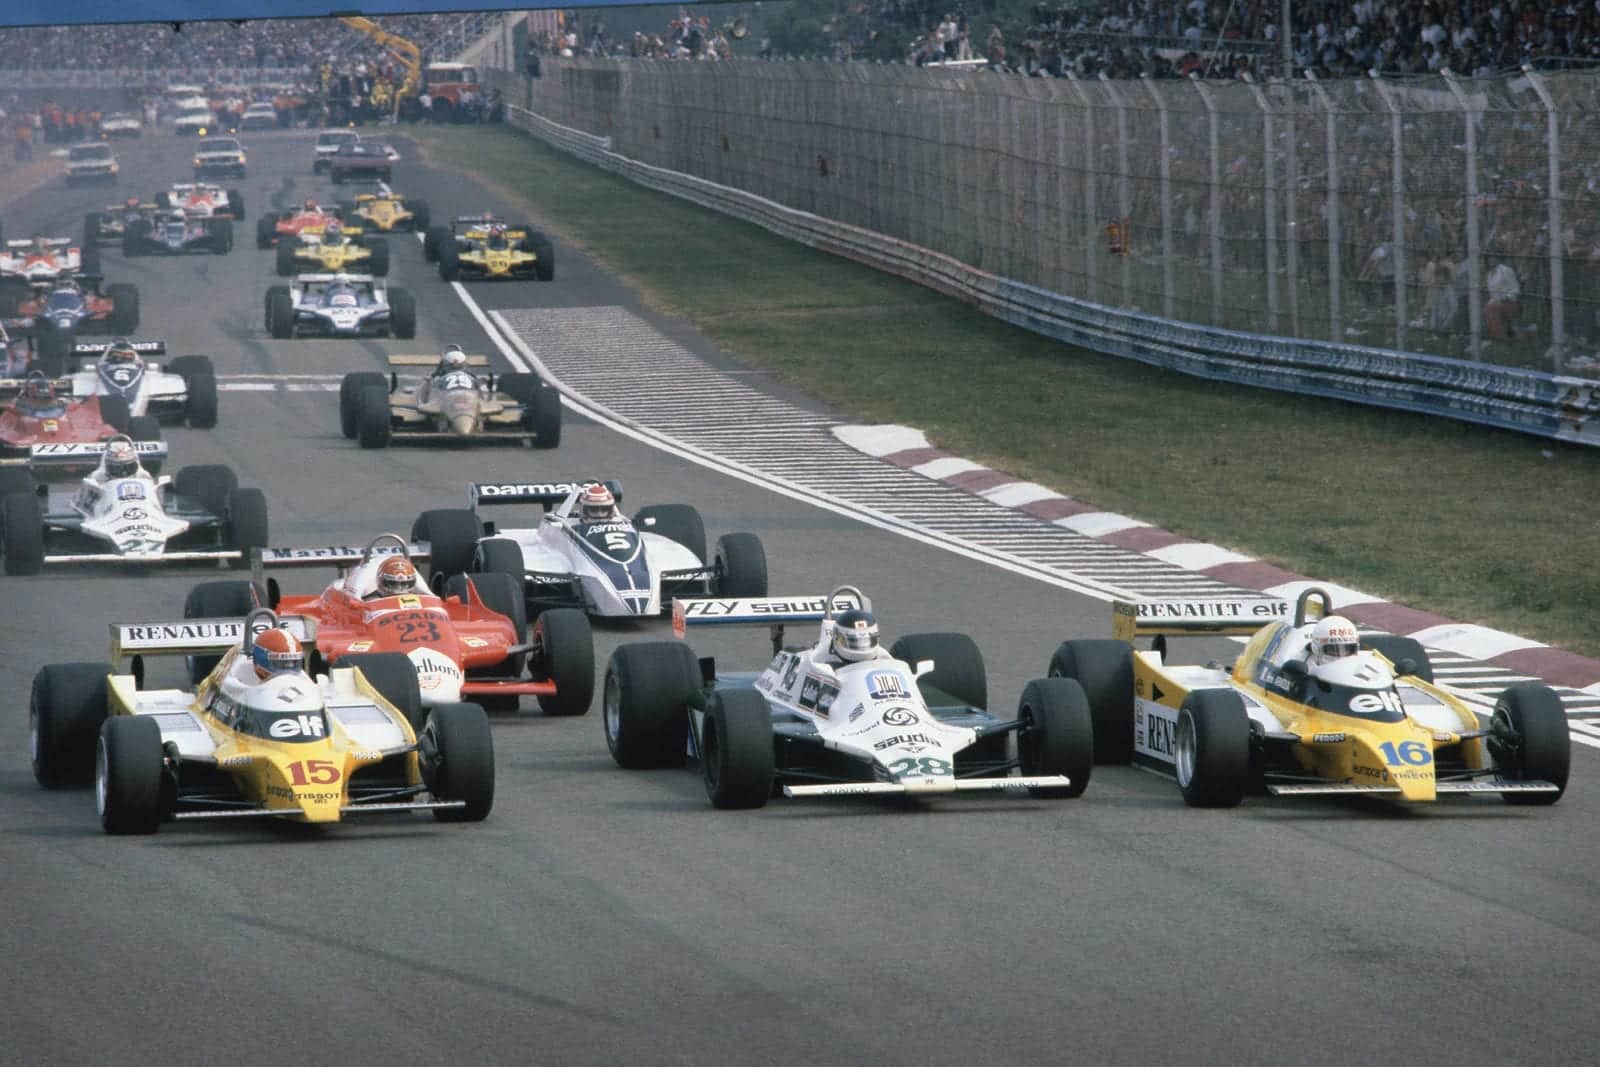 Ground effect cars at the start of the 1980 Italian Grand Prix